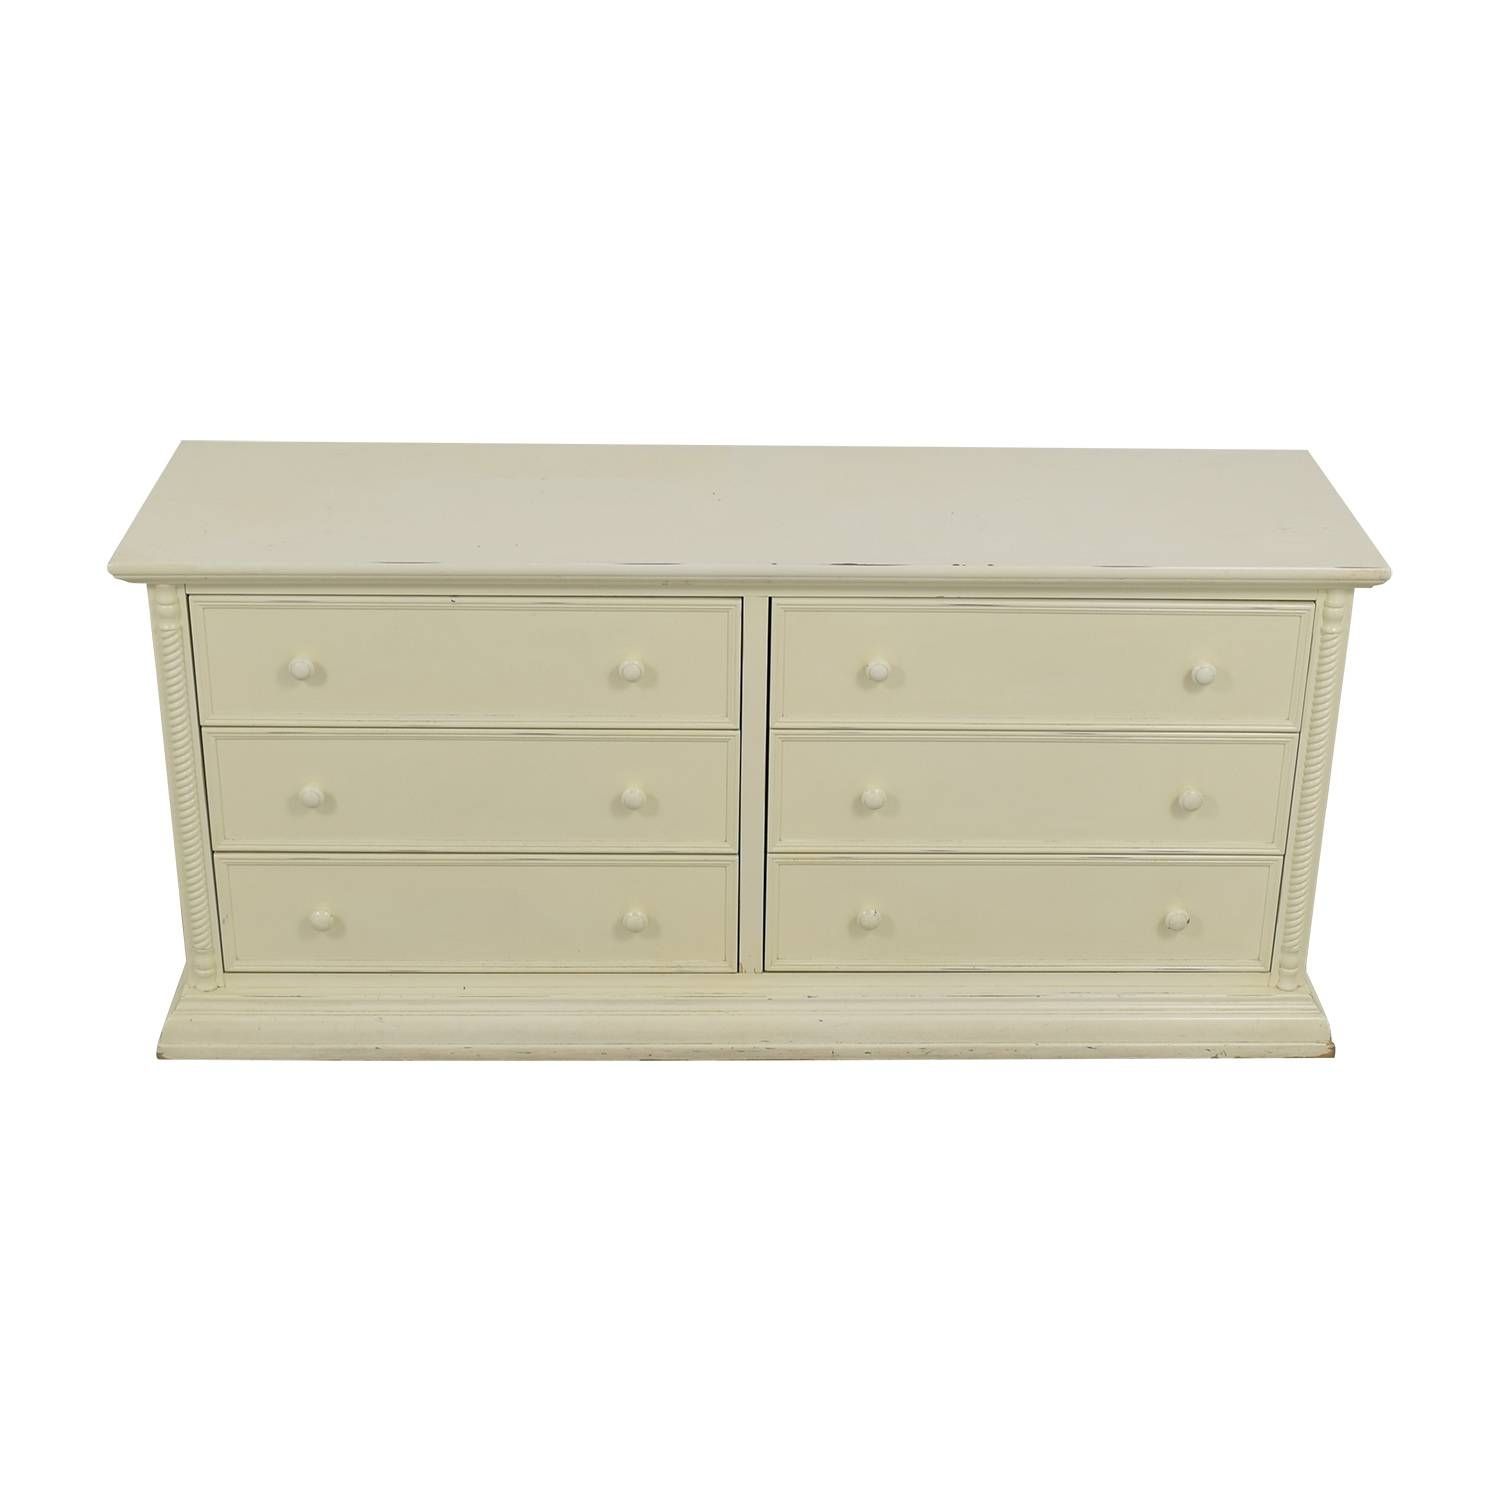 78% Off – Bellini Bellini White Dresser / Storage Intended For Second Hand Dressers And Sideboards (View 7 of 15)